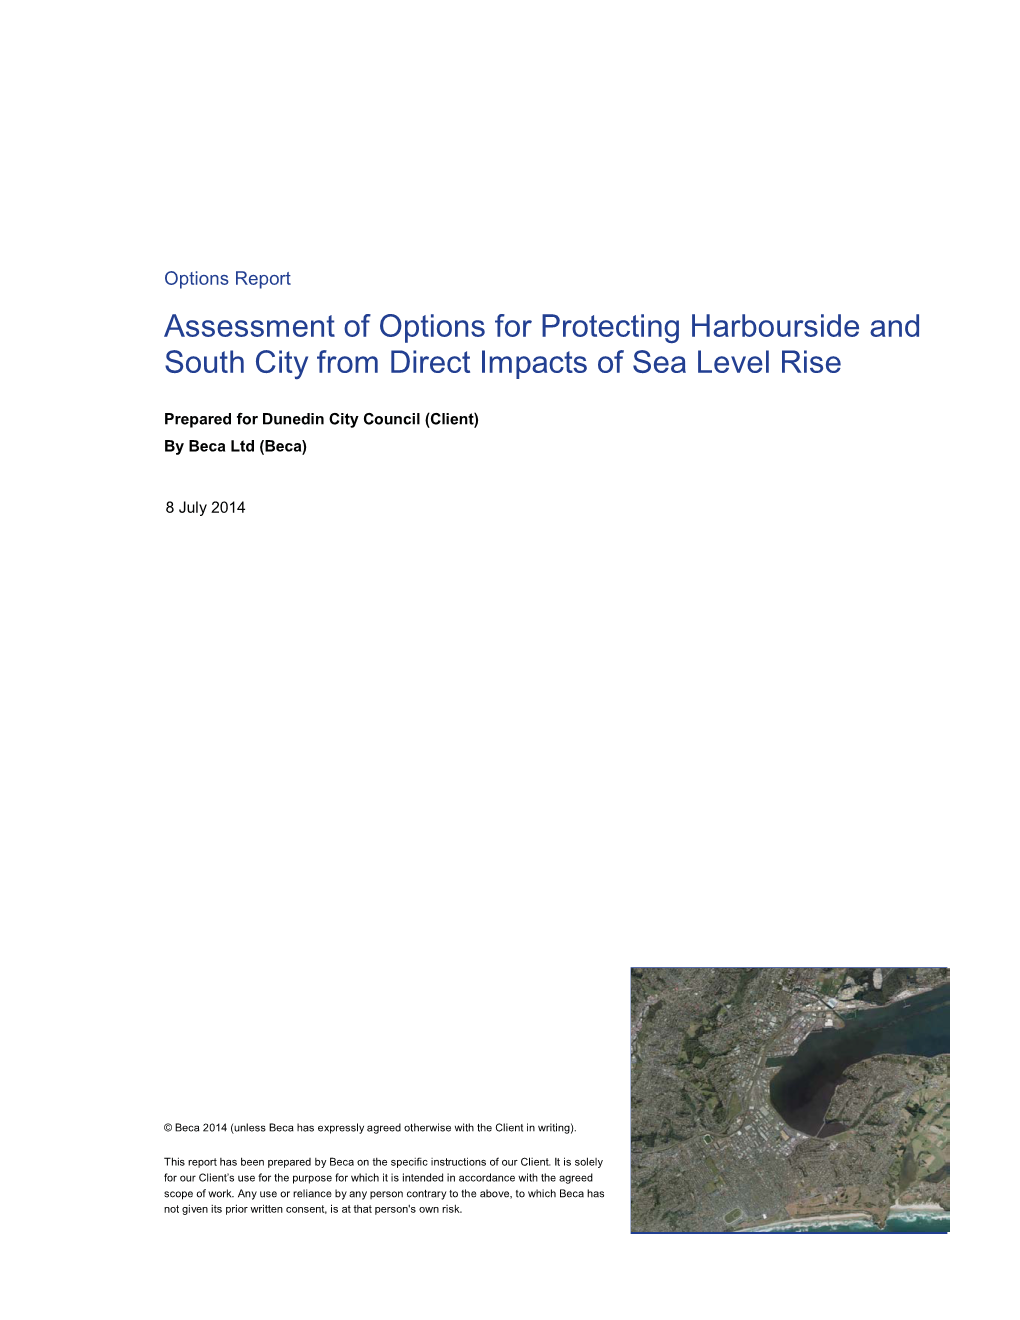 Assessment of Options for Protecting Harbourside and South City from Direct Impacts of Sea Level Rise